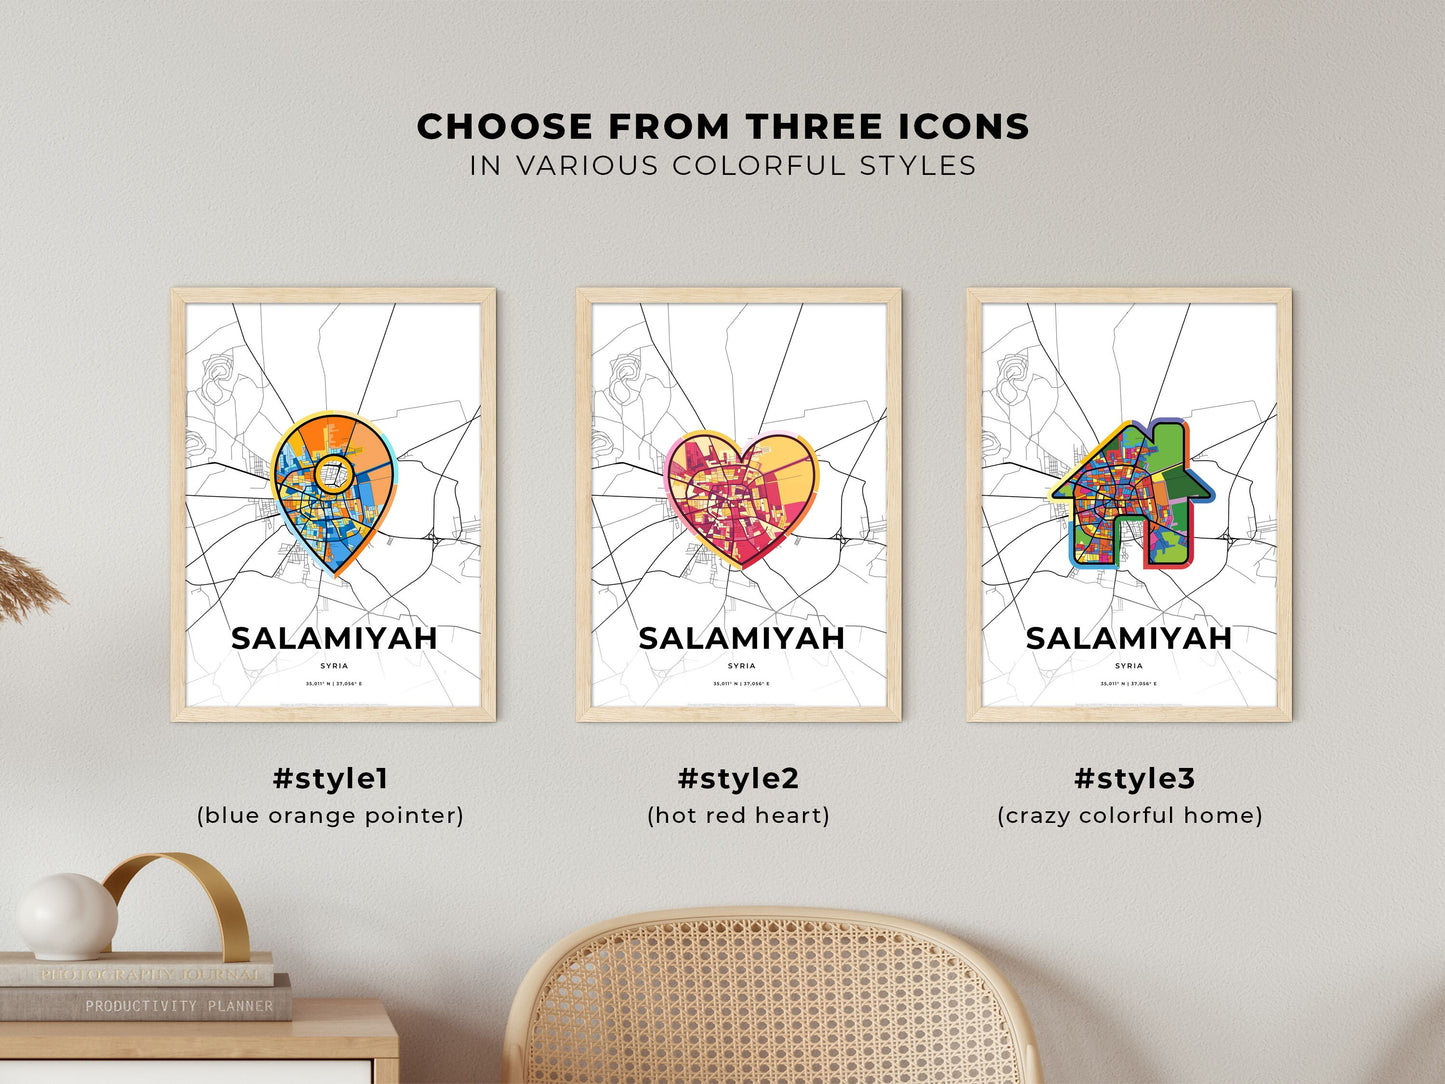 SALAMIYAH SYRIA minimal art map with a colorful icon. Where it all began, Couple map gift.